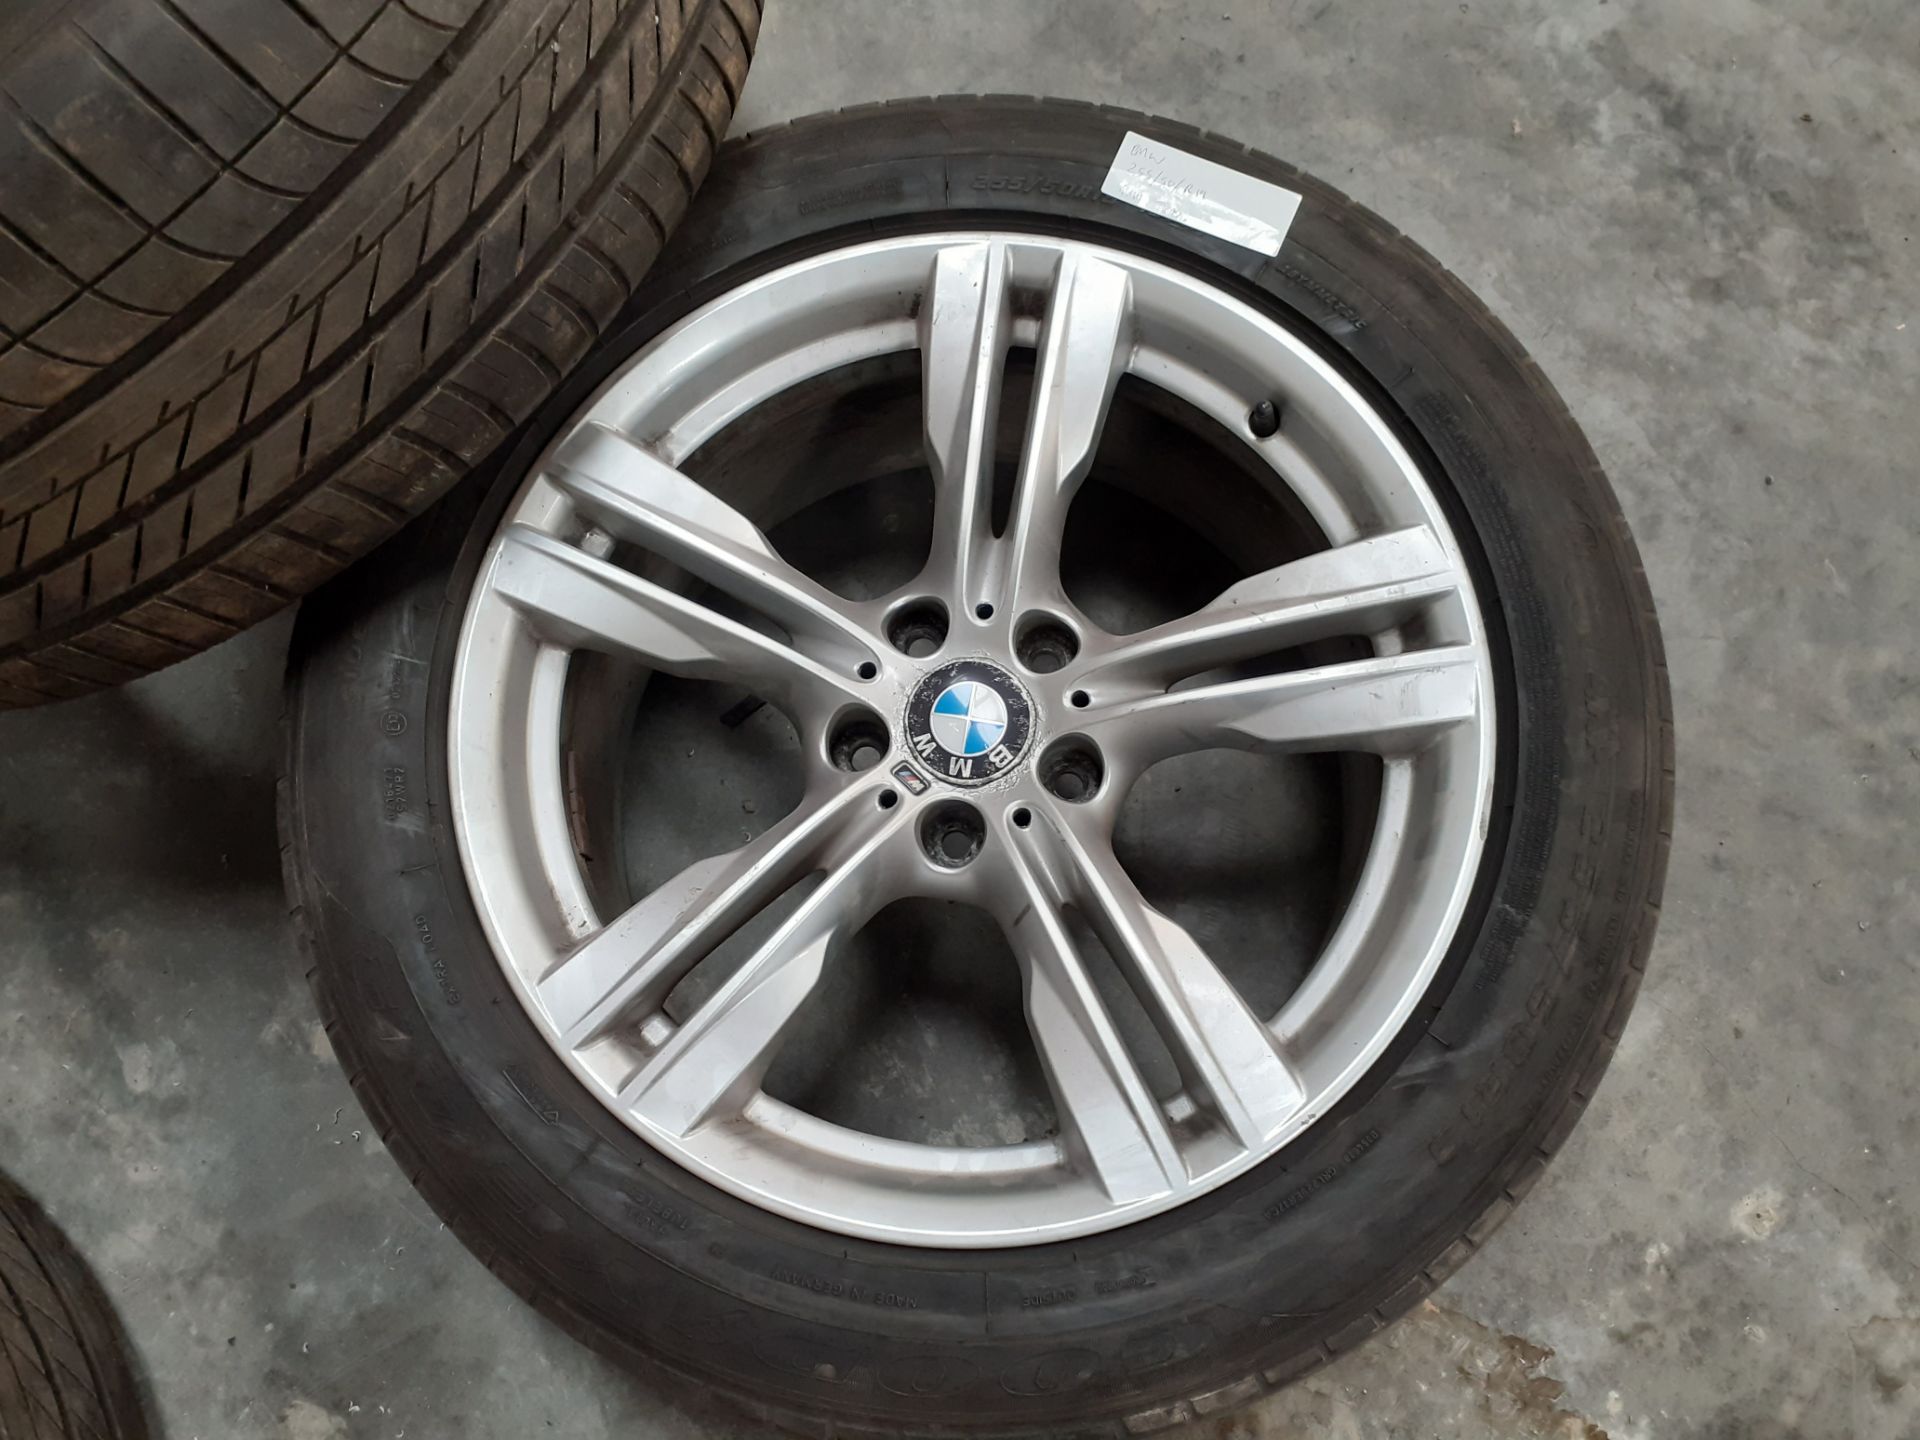 4 x BMW X5 X6 ALLOY WHEELS WITH TYRES 255 50 19, 4mm TREAD, USED *NO VAT* - Image 2 of 3